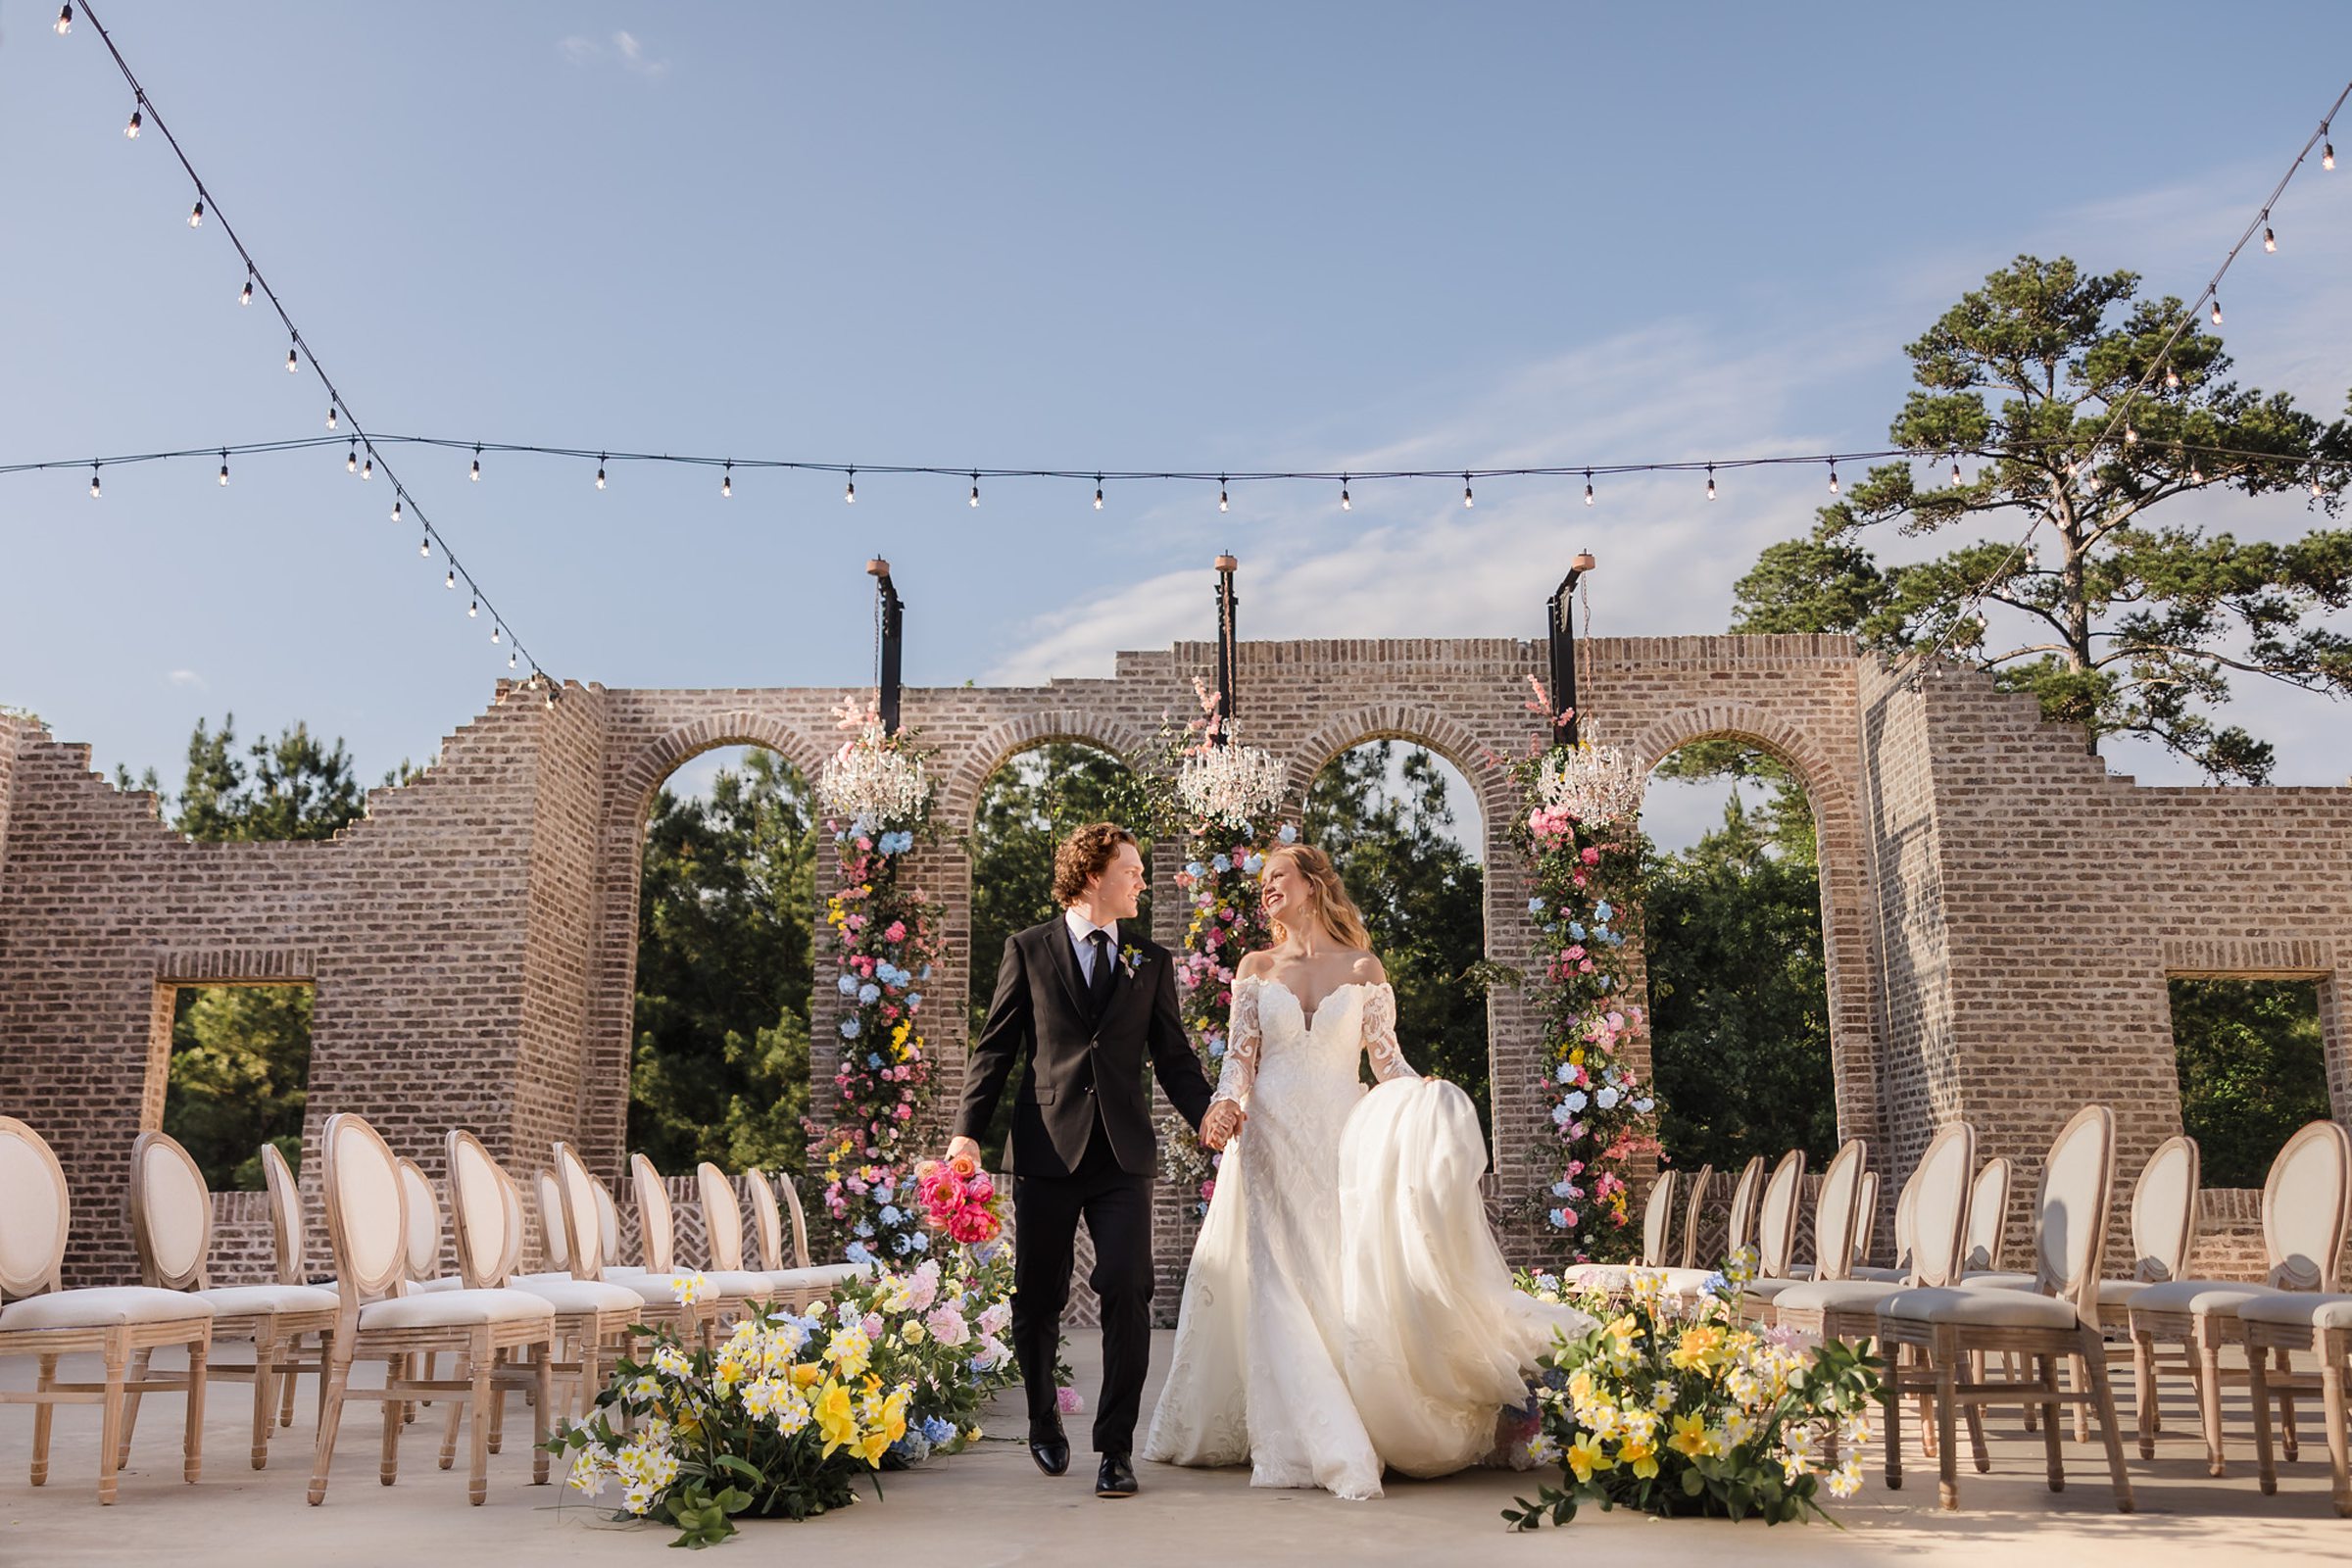 Bride and Groom celebrate their wedding at the Iron Manor in Montgomery, Texas.